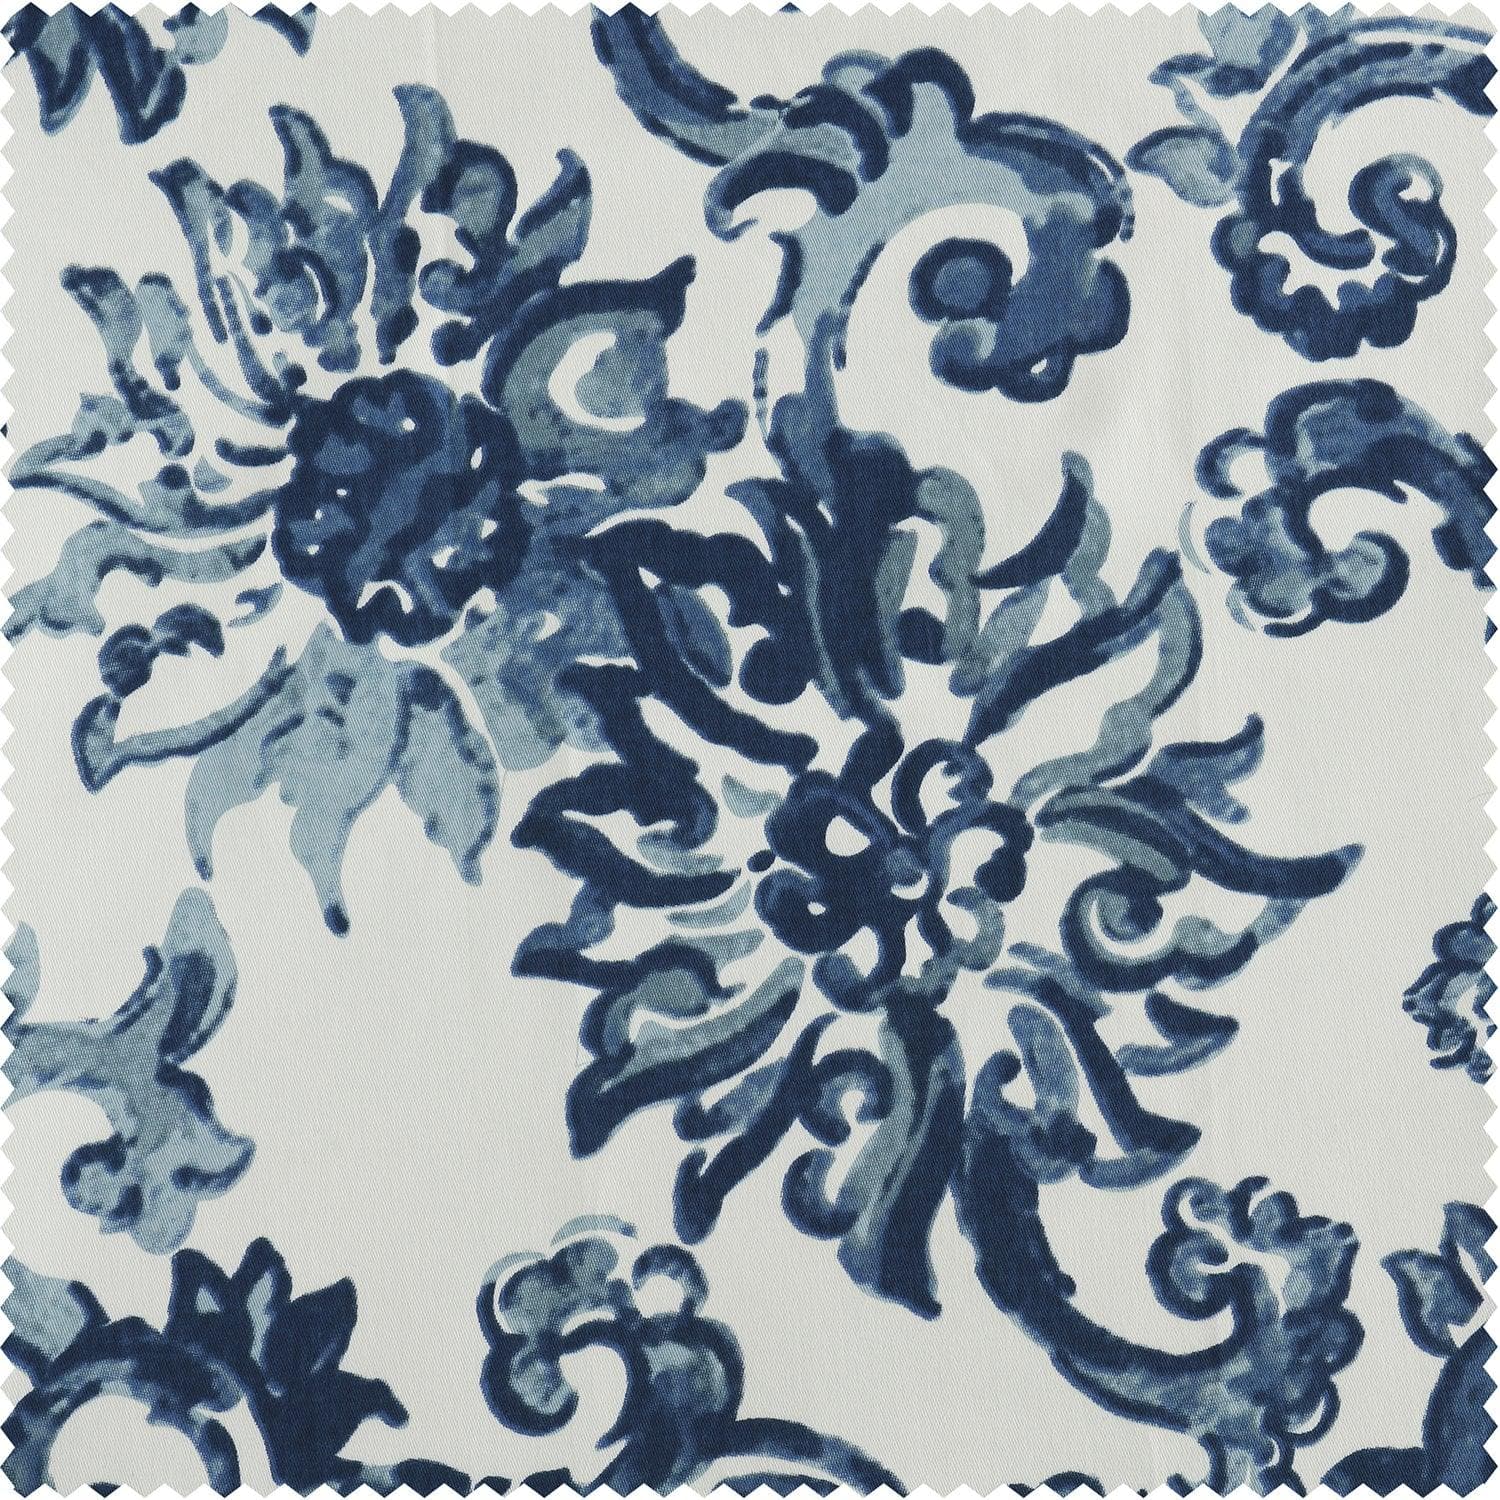 Indonesian Blue Printed Cotton Swatch